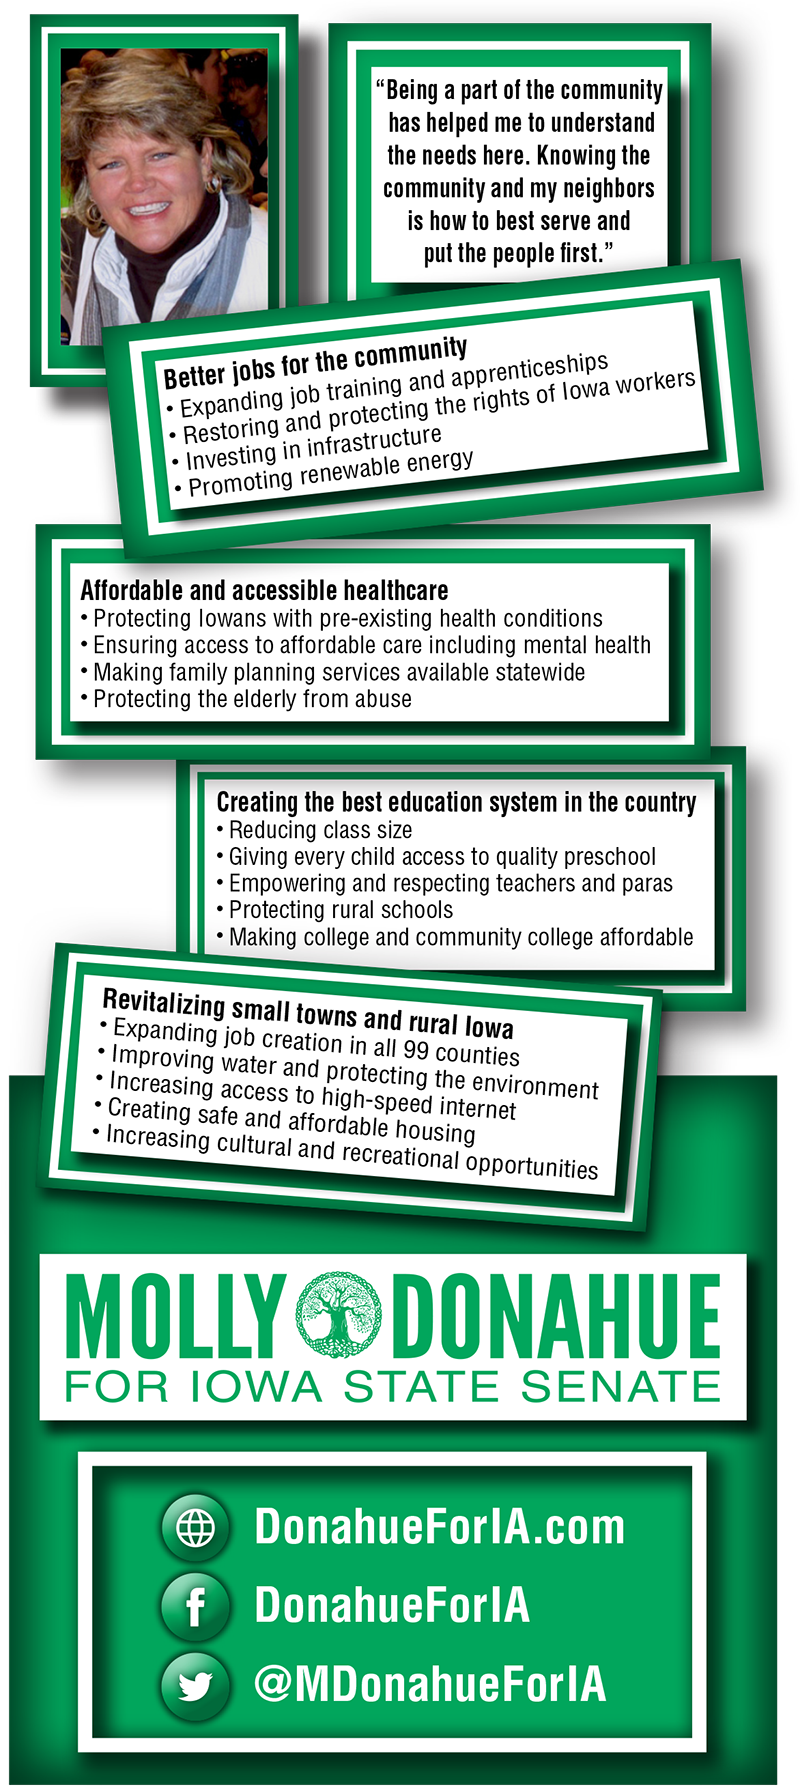 As your State Senator, Molly Donahue will put the people of Iowa first. She is fighting for better jobs for the community, affordable and accessible healthcare, to create the best eduction system in the country and revitalizing small towns and rural Iowa.